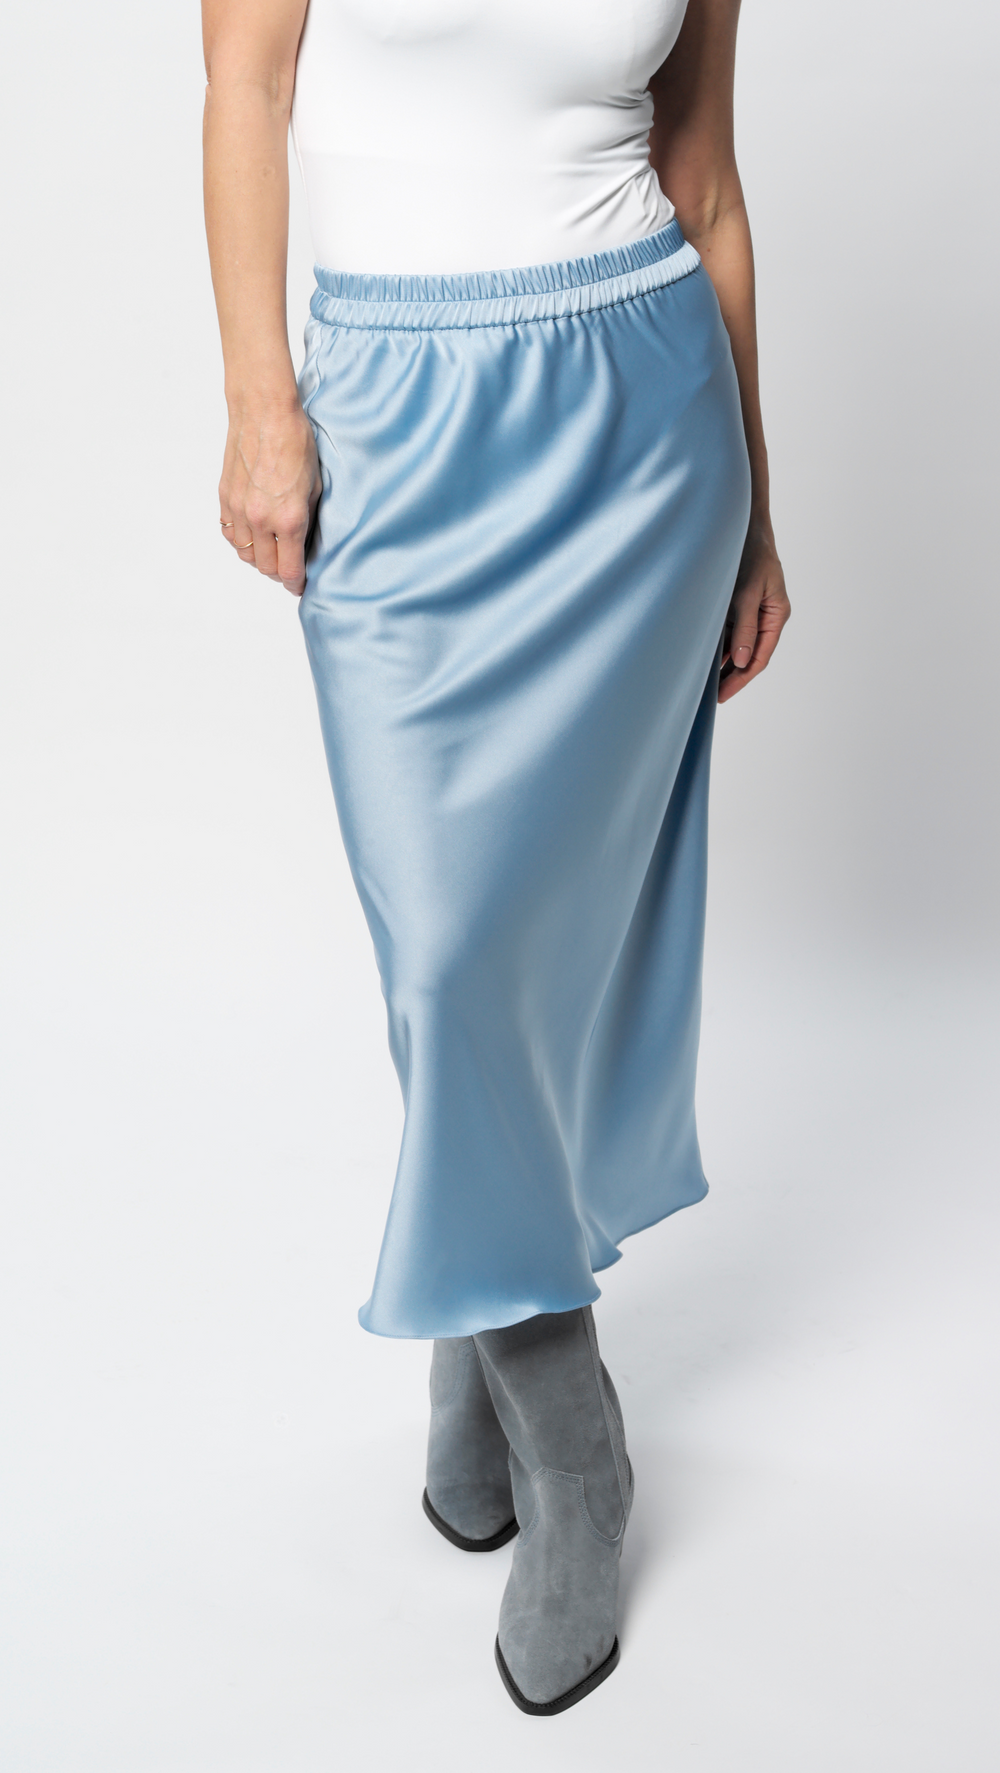 Midi-length skirt "Sky Blue" BeaA - Be At Home with Yourself